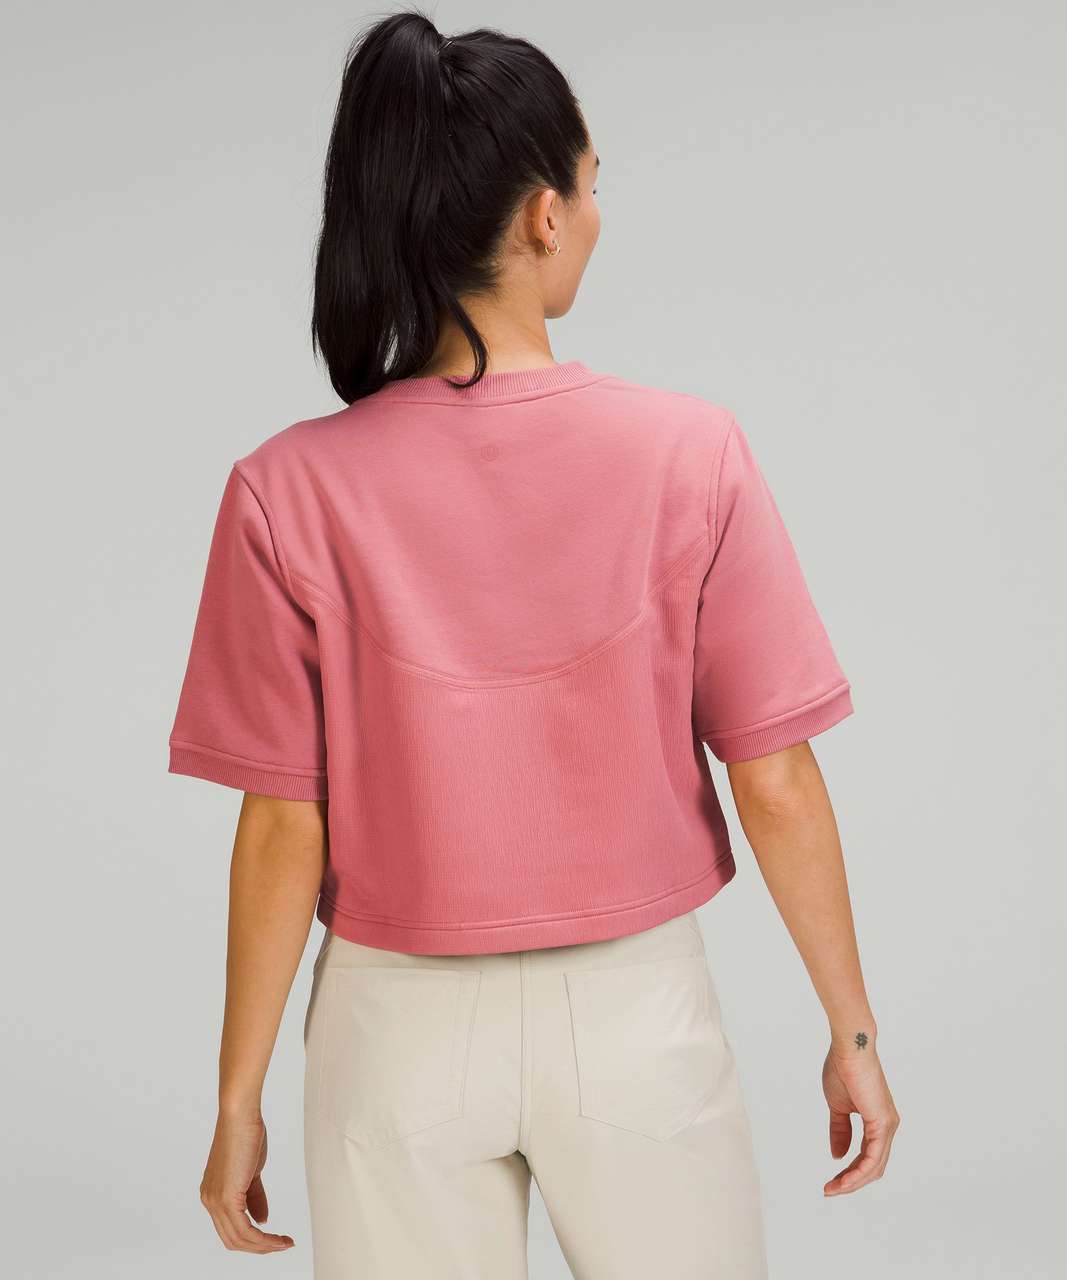 Lululemon Cotton French Terry + Swift T-Shirt - Brier Rose